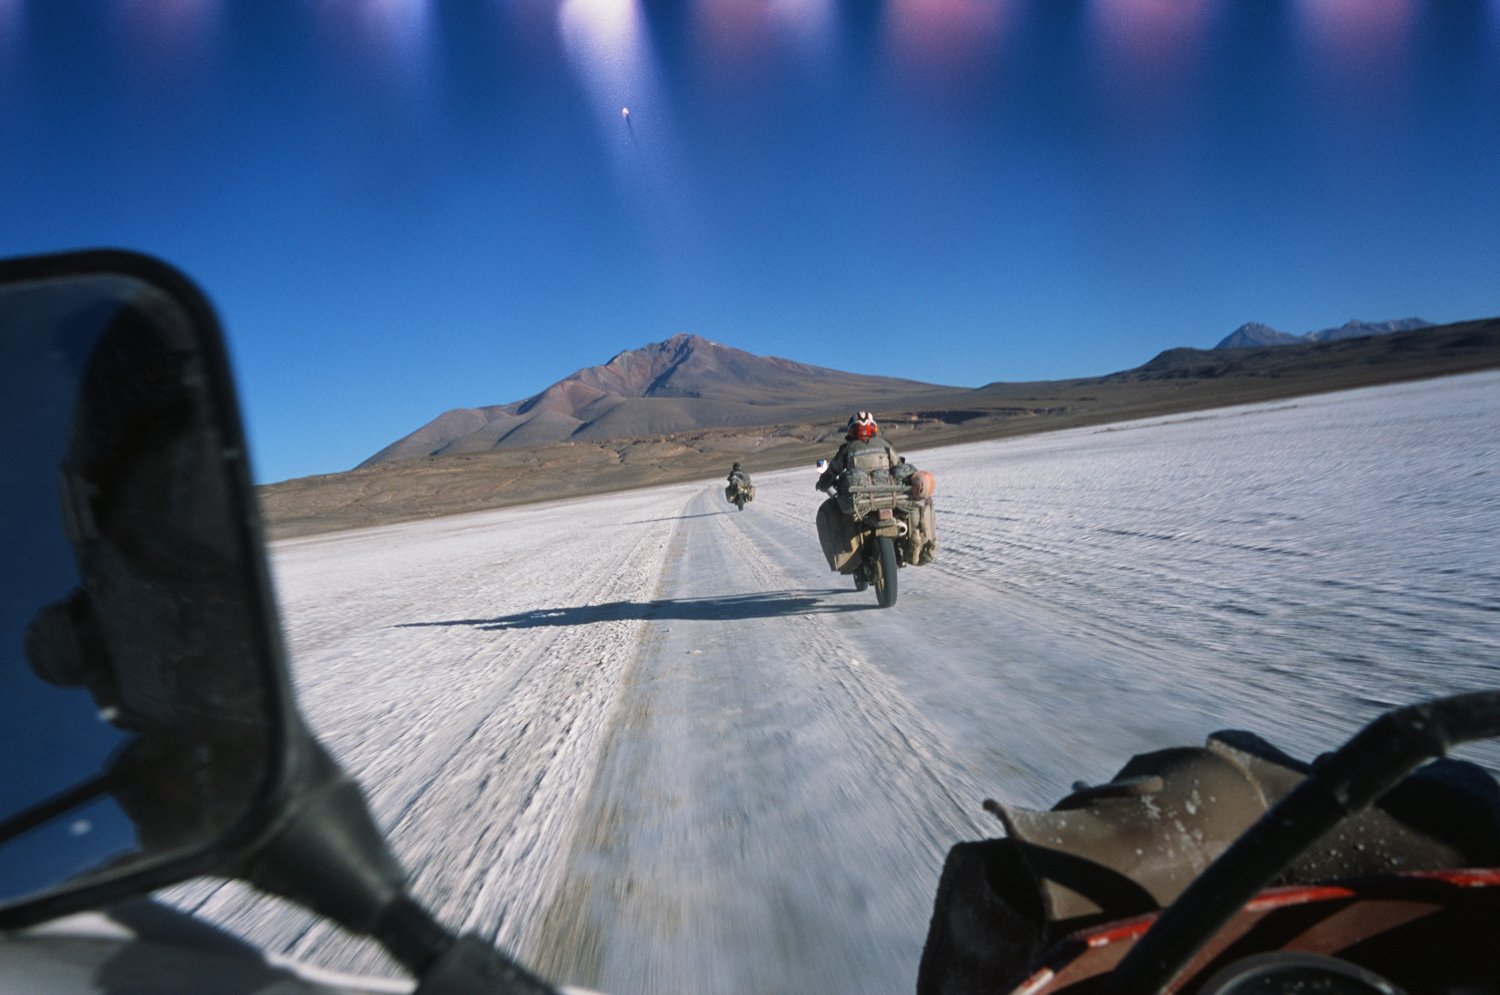  POV from motorcycle - two motorcycles ahead on snow covered and icy road headed towards a mountain. 